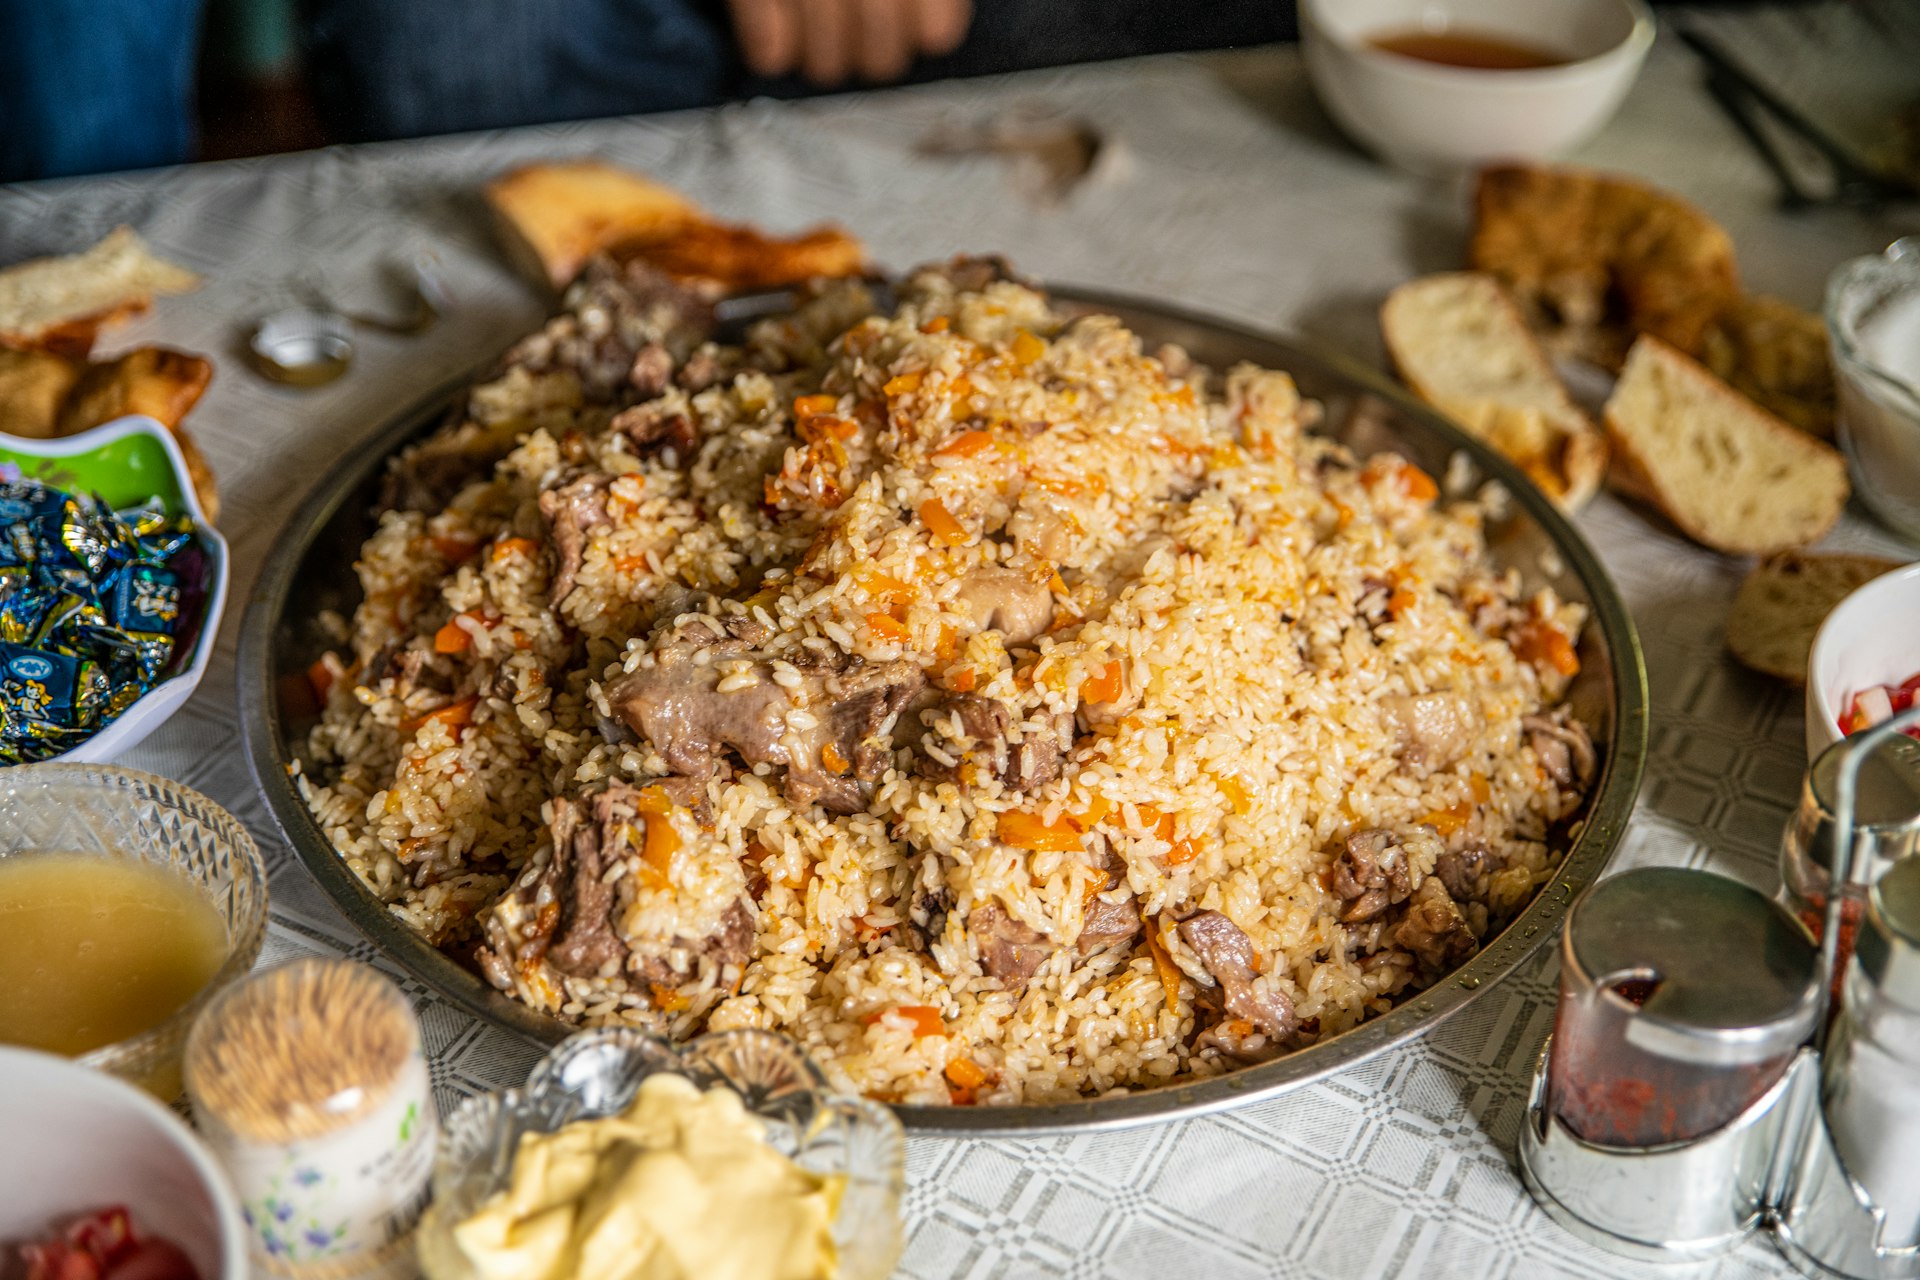 A rice dish with pieces of meat in it